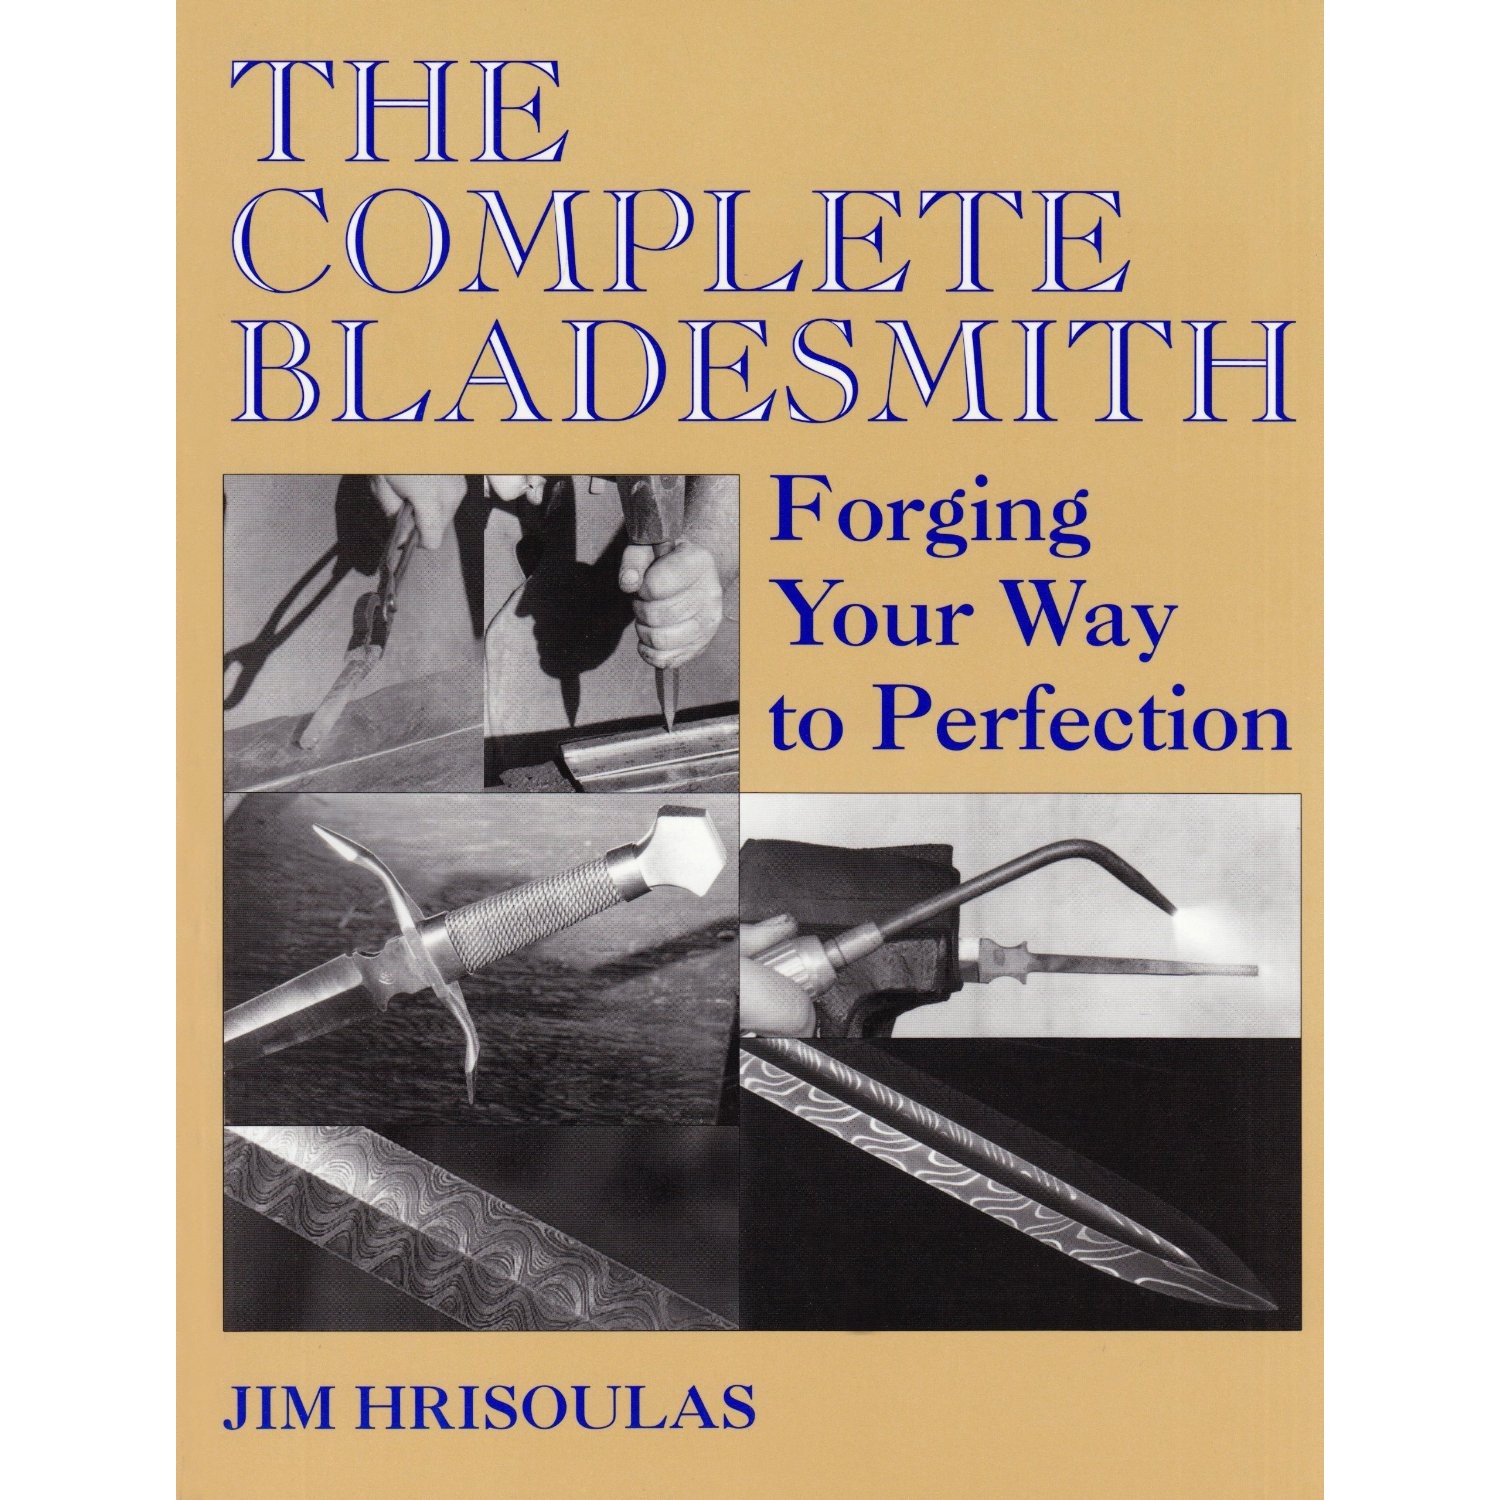 Jim Hrisoulas - The Complete Bladesmith - Forging Your Way to Perfektion